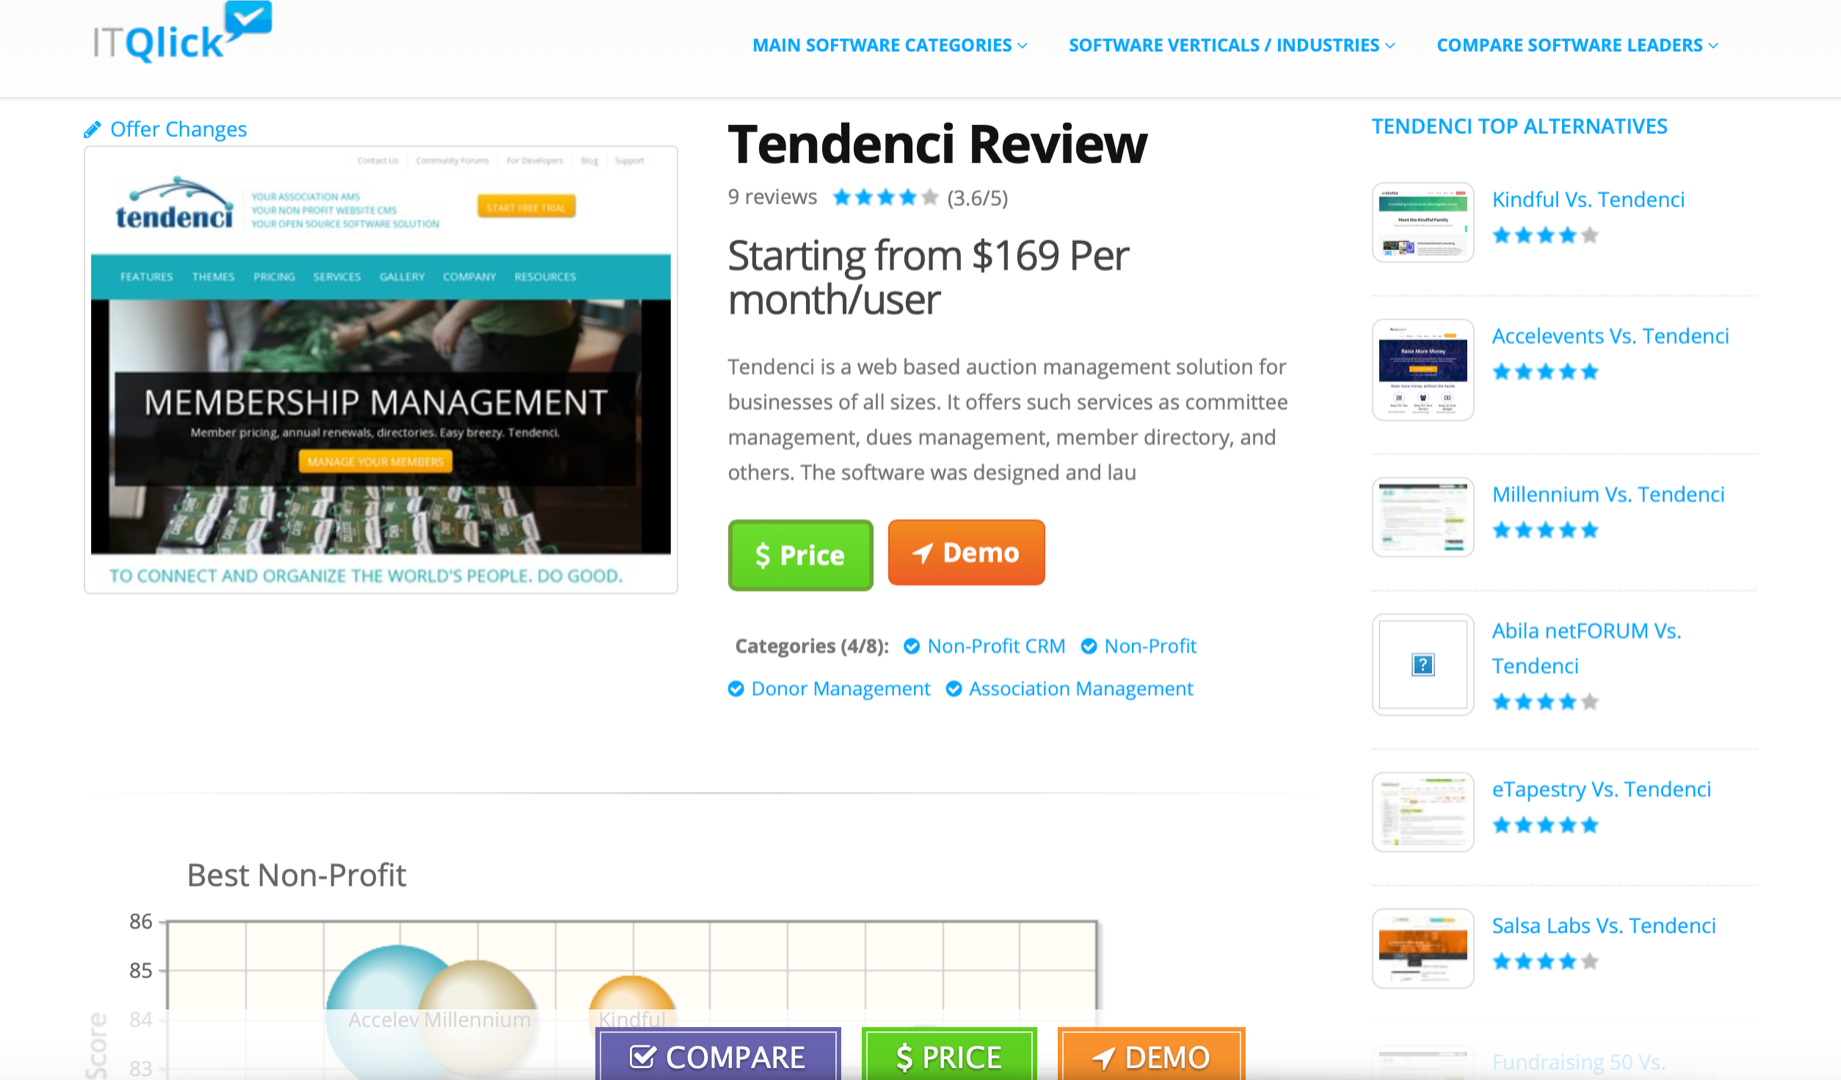 ITQuick Reviews Tendenci Software